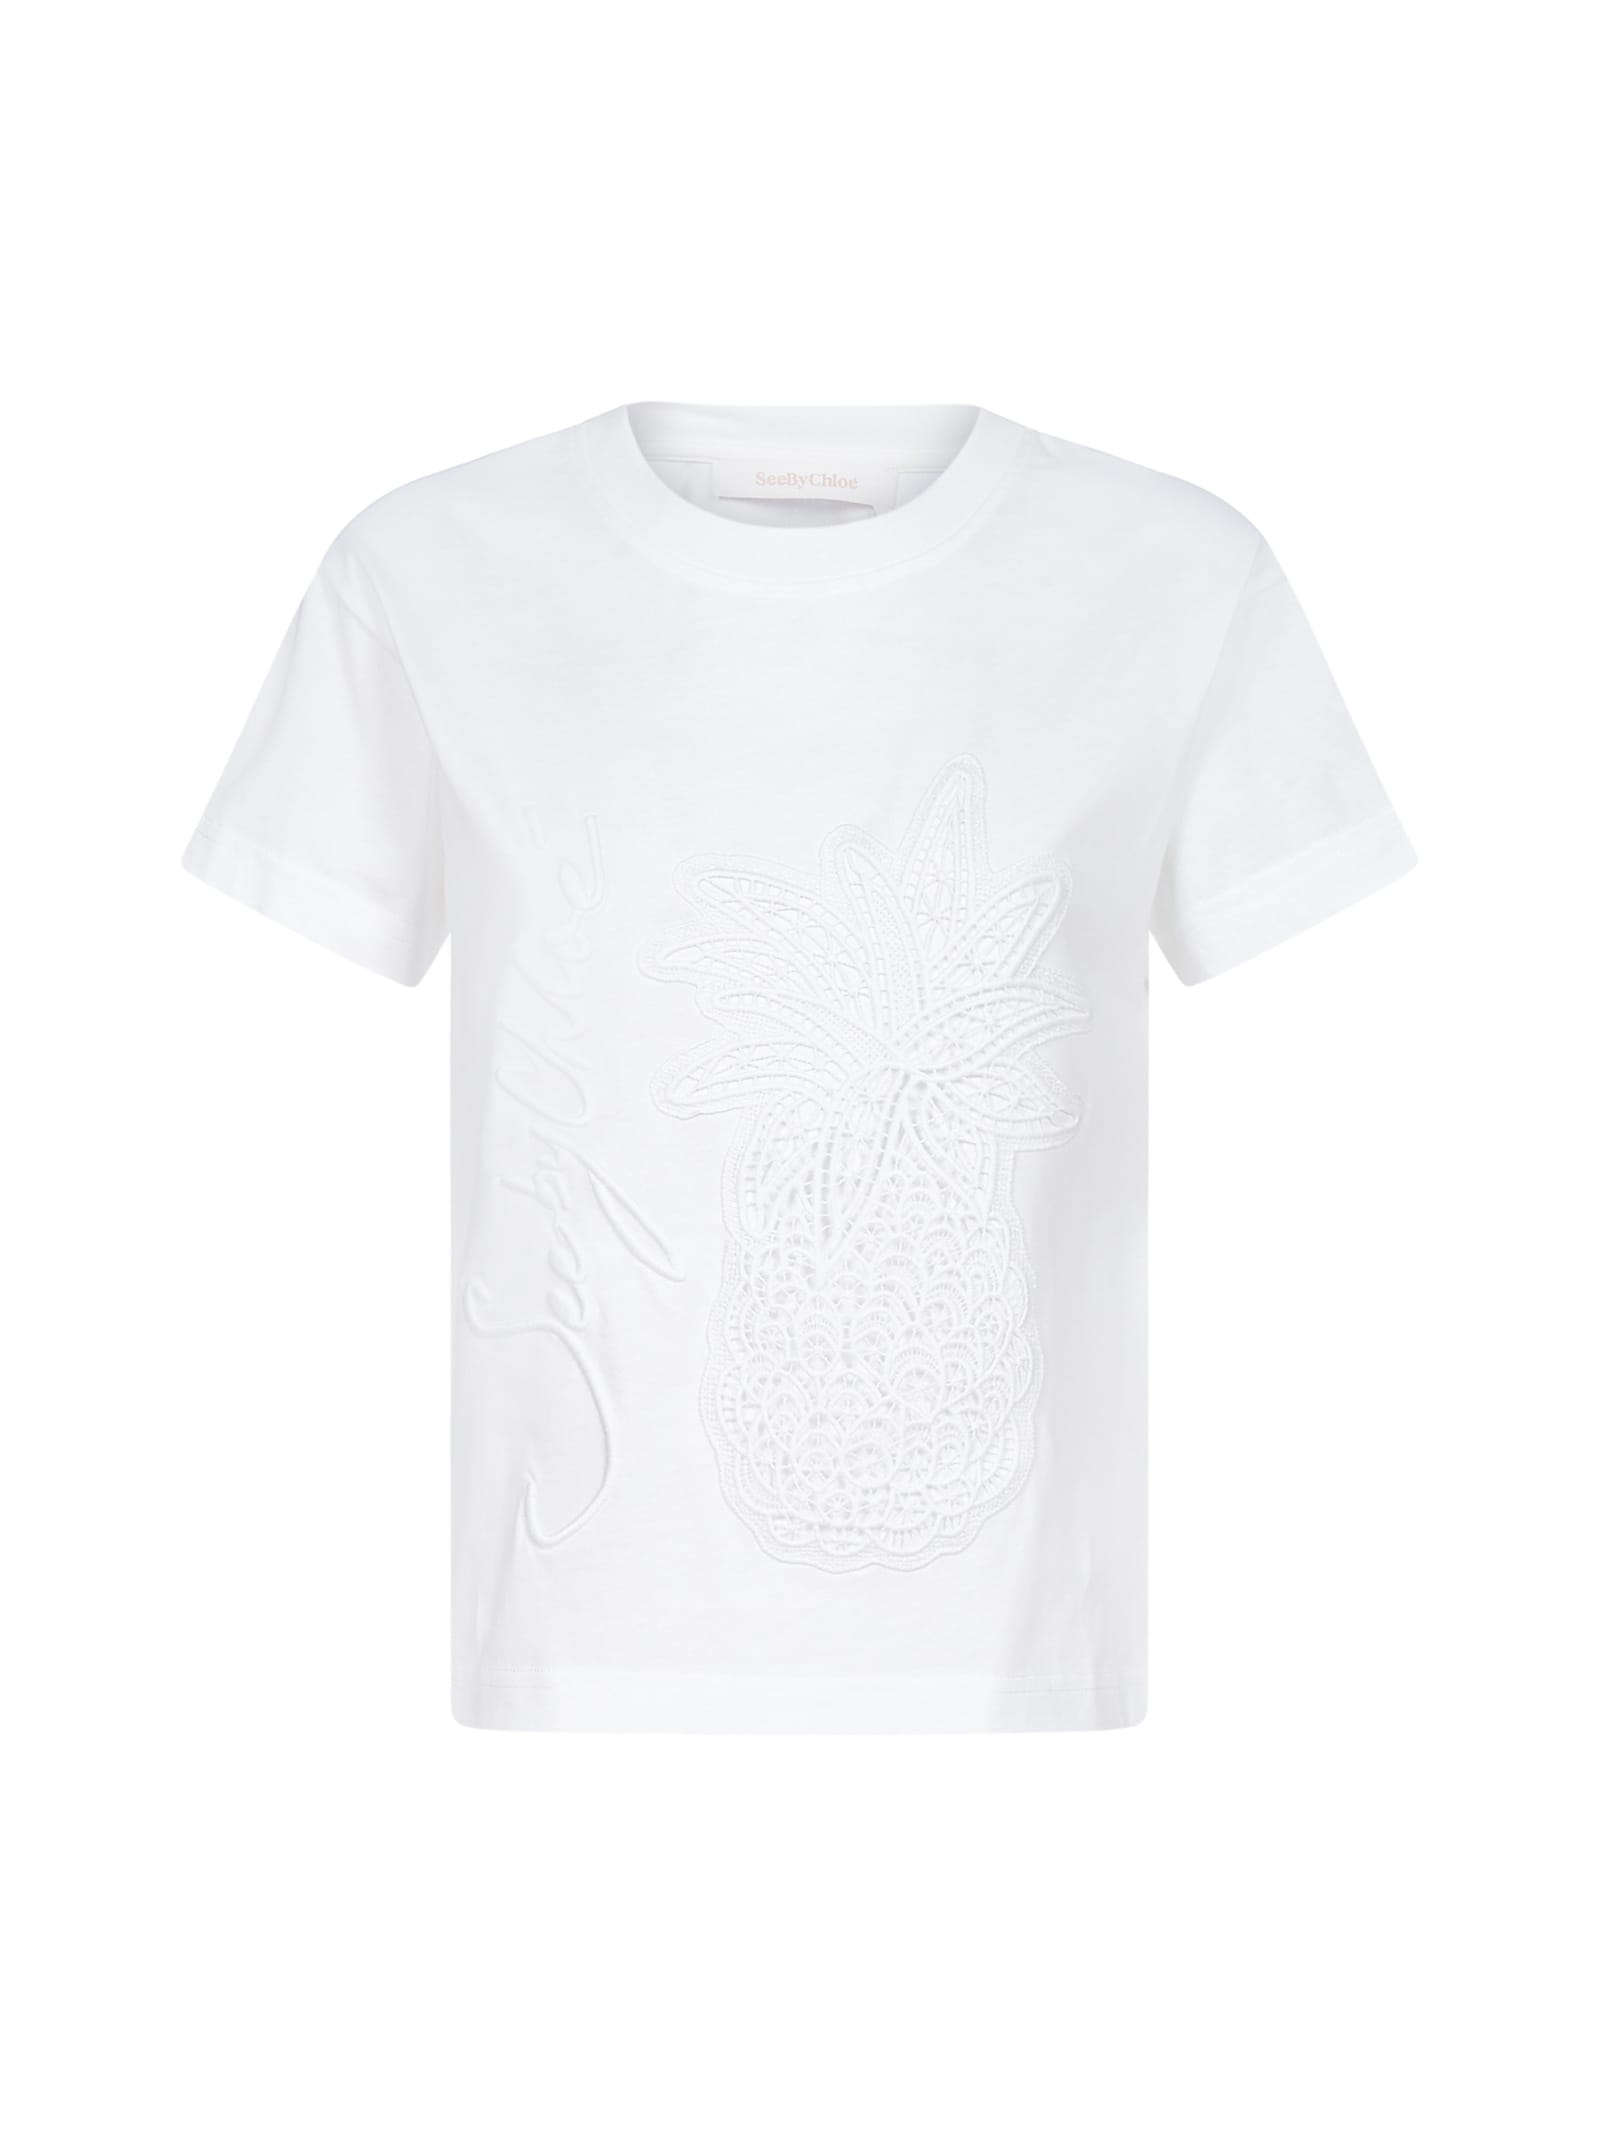 See by Chloé Logo And Embroidery Cotton T-shirt